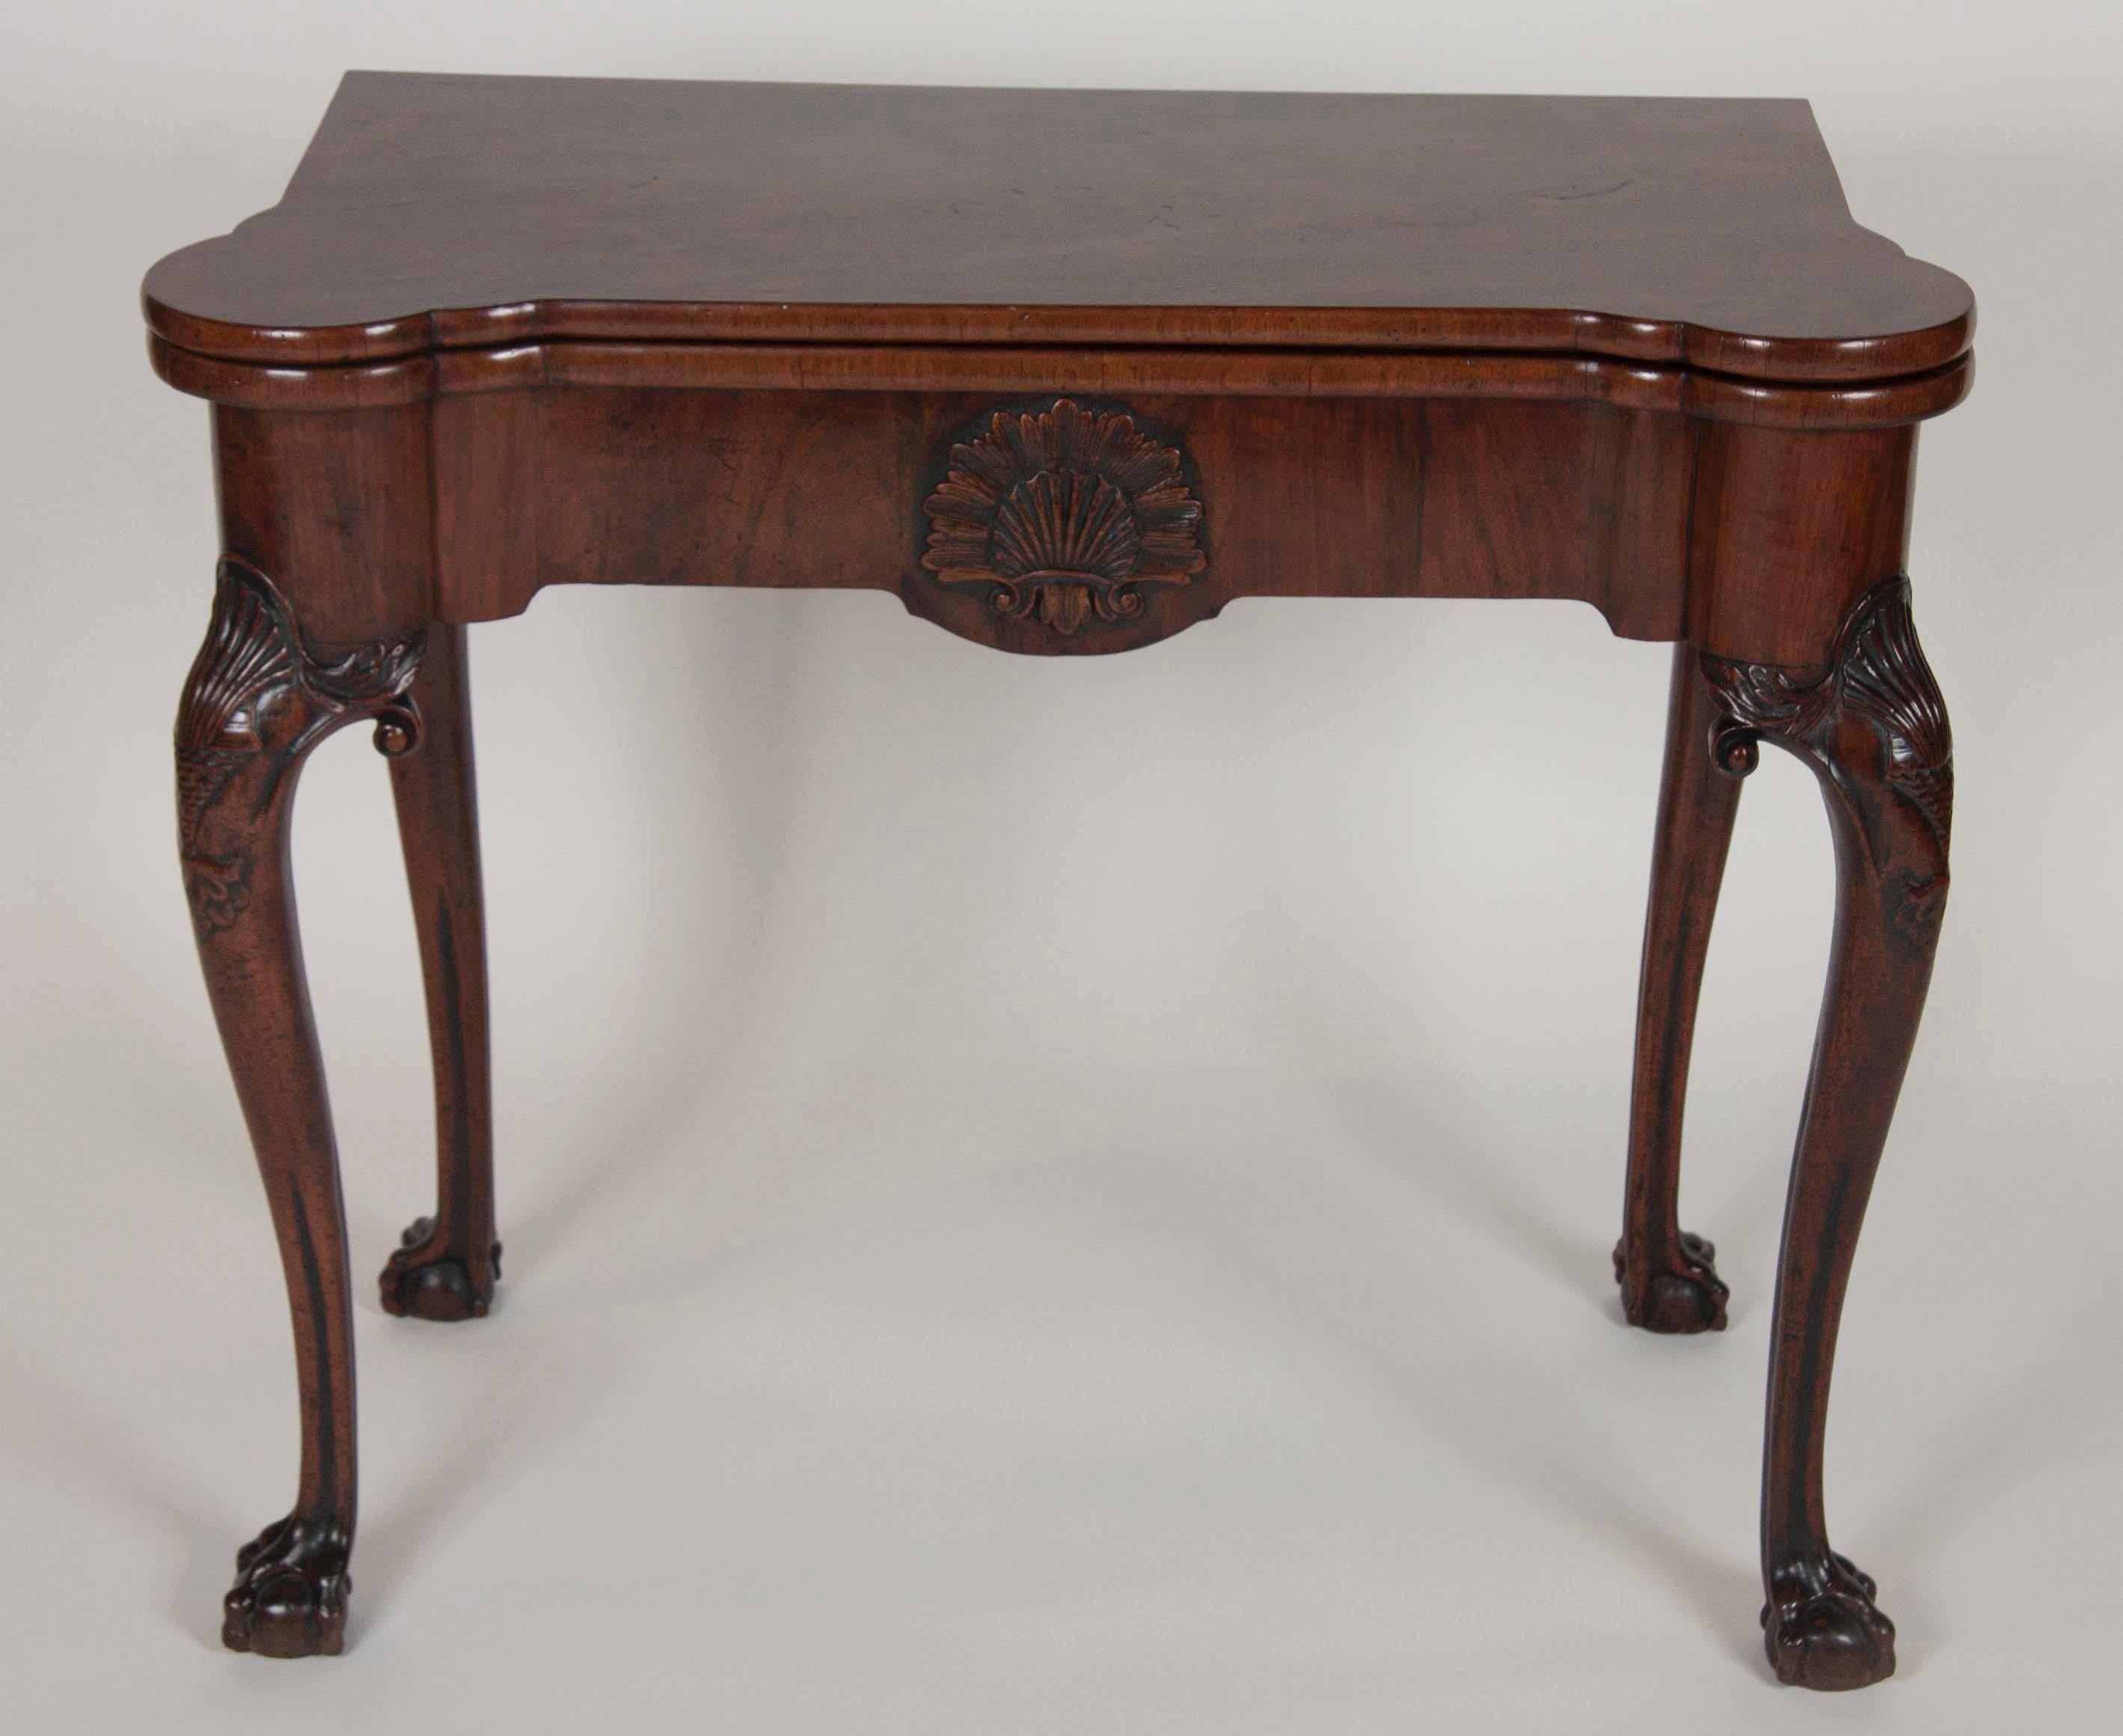 A fine walnut George I period table with a central shell carving and concertina opening action. Turreted top corners over a central carved shell, carved shell cabriole legs molded and ending on ball and claw feet.